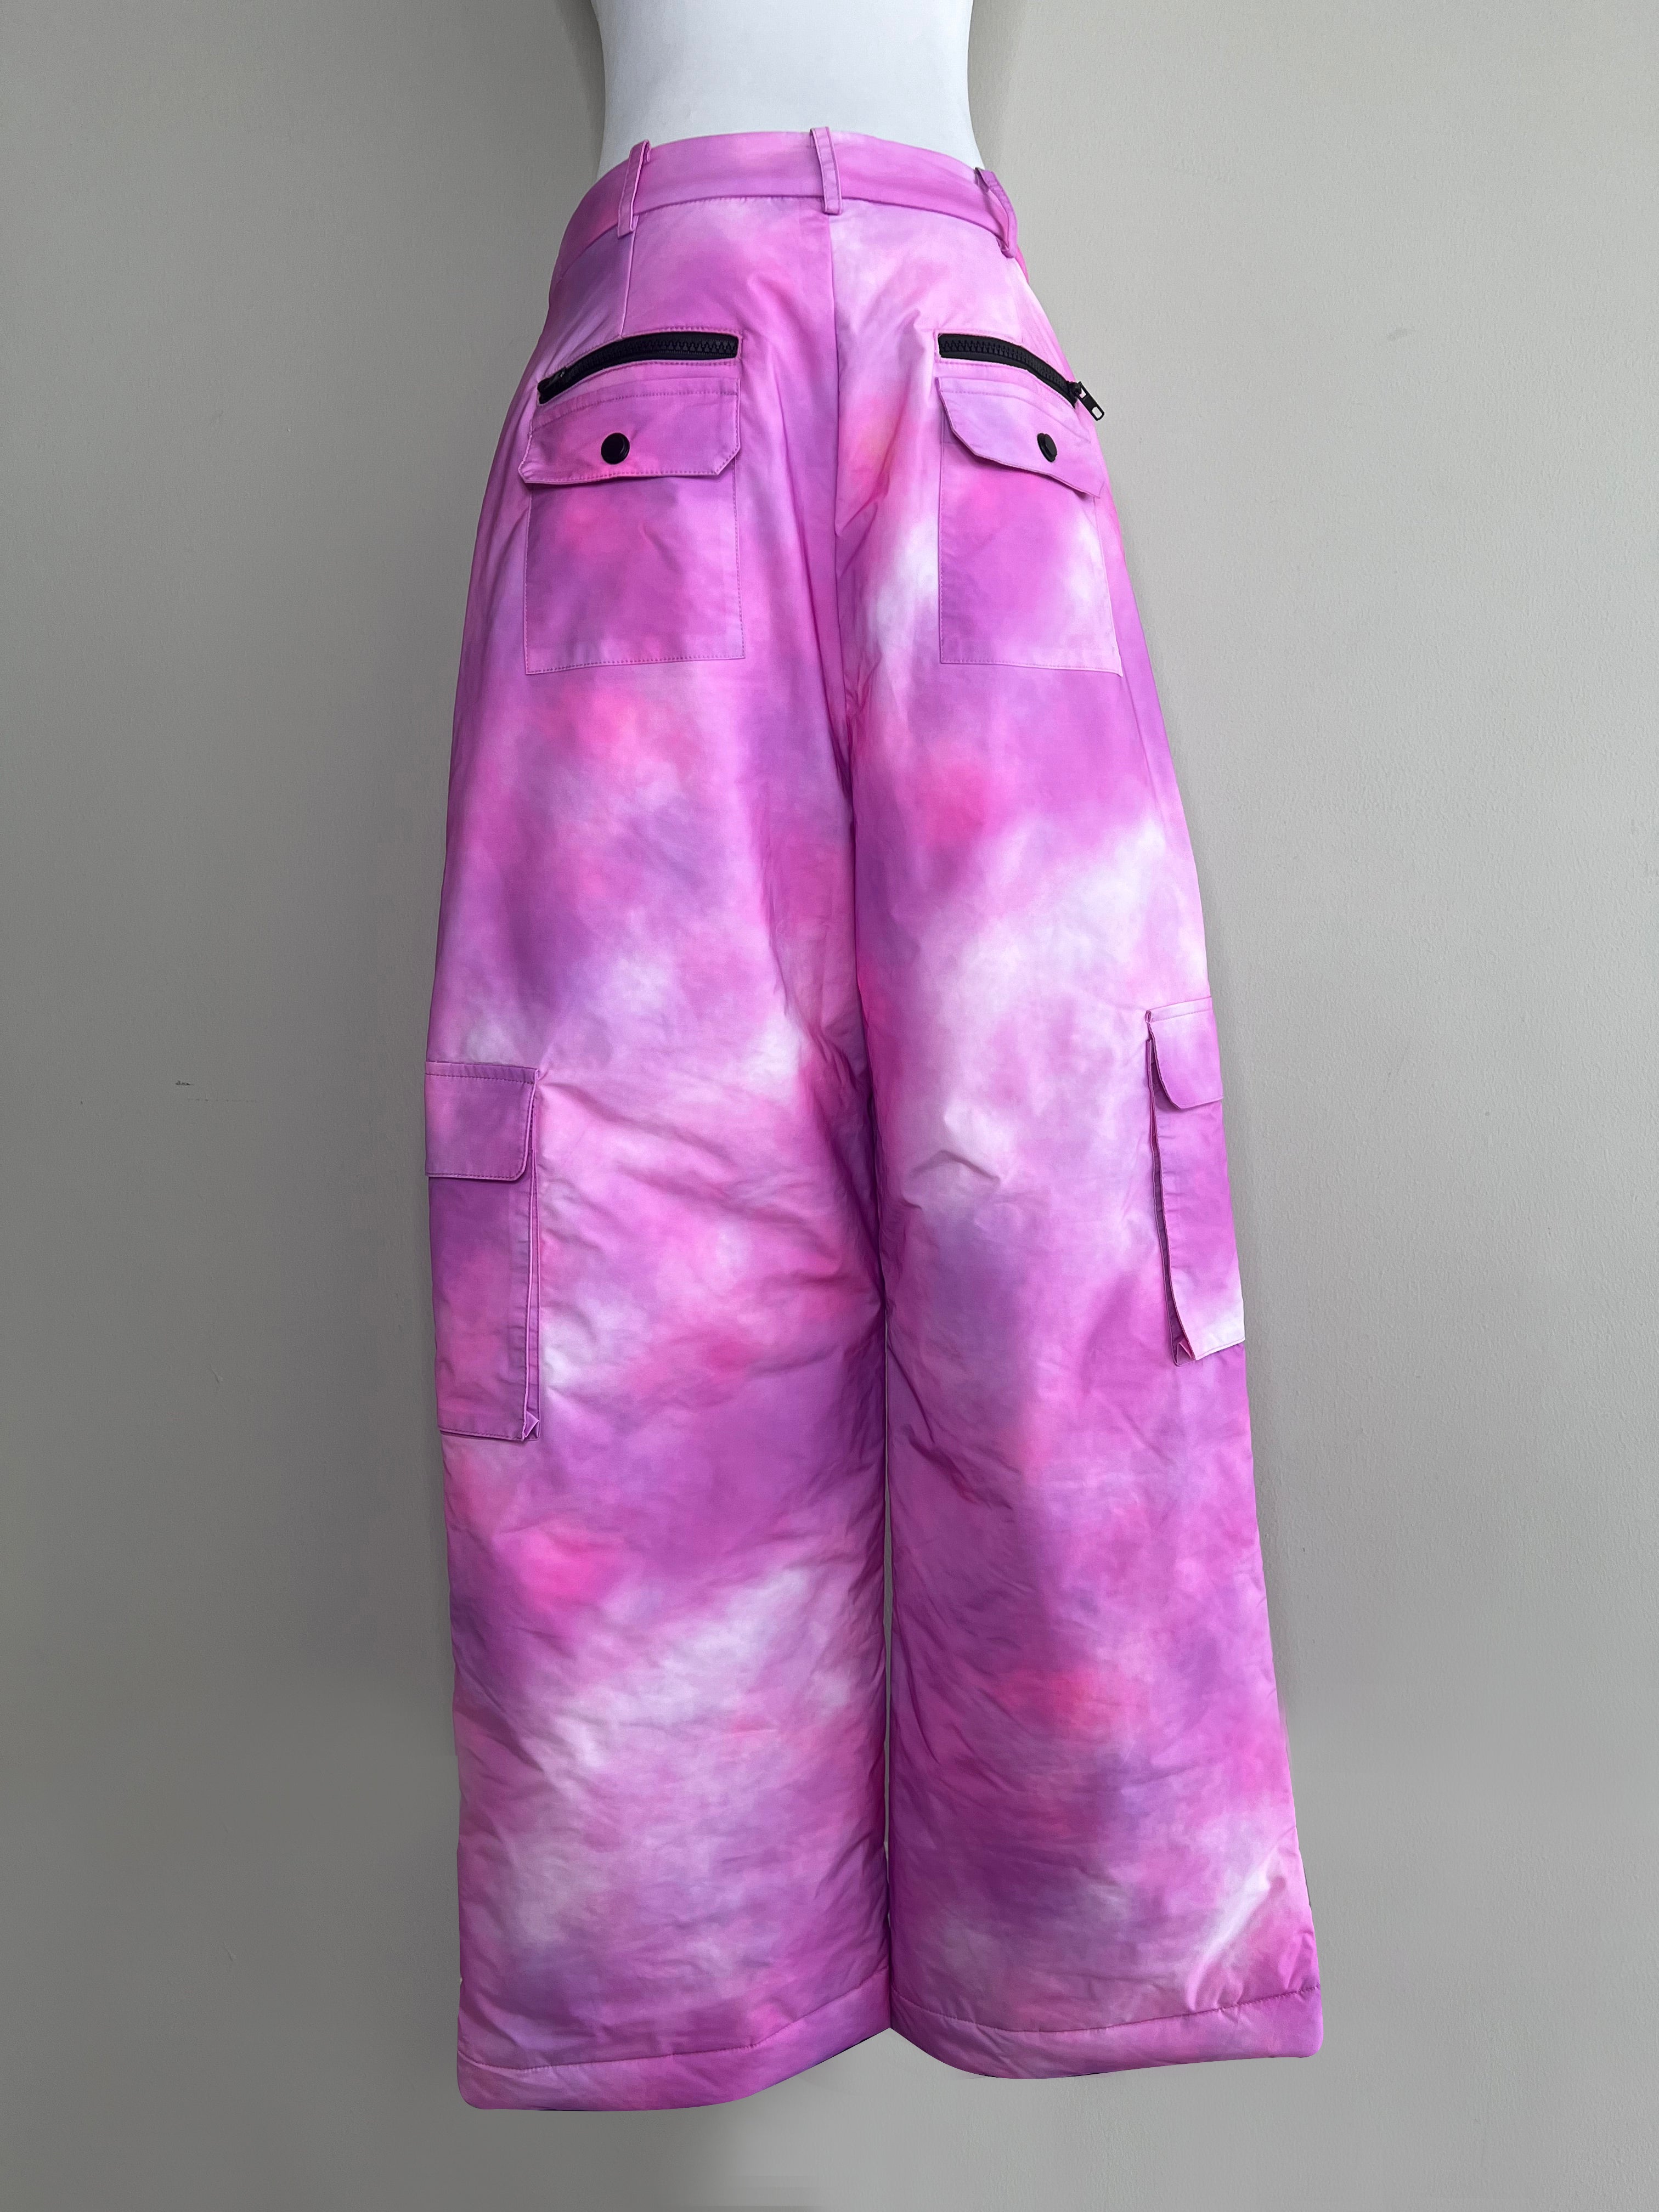 Pink Oversized Cargo Pants - 8 by Yoox